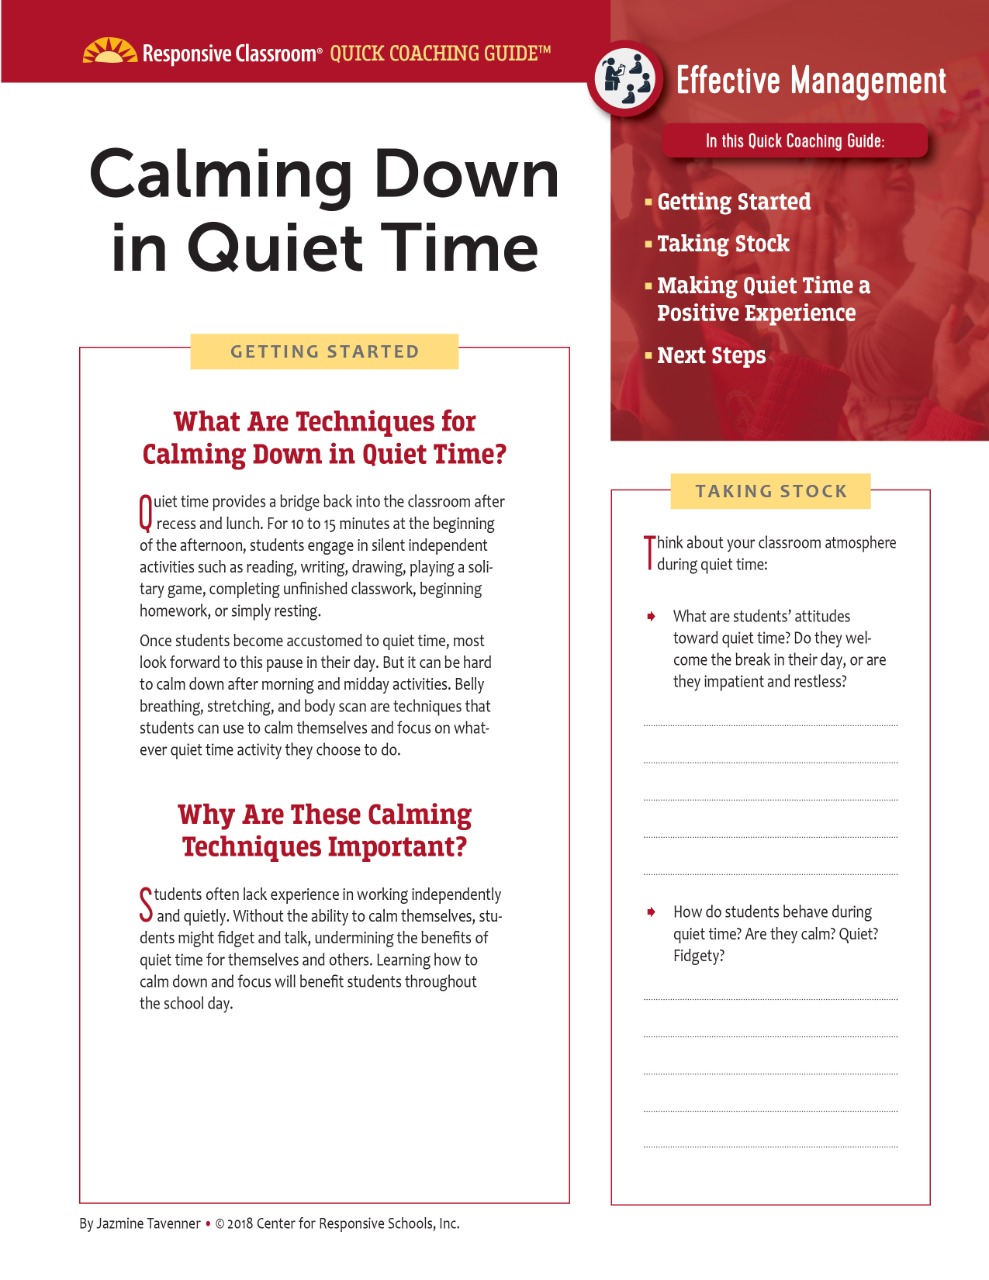 Quick Coaching Guide: Calming Down in Quiet Time